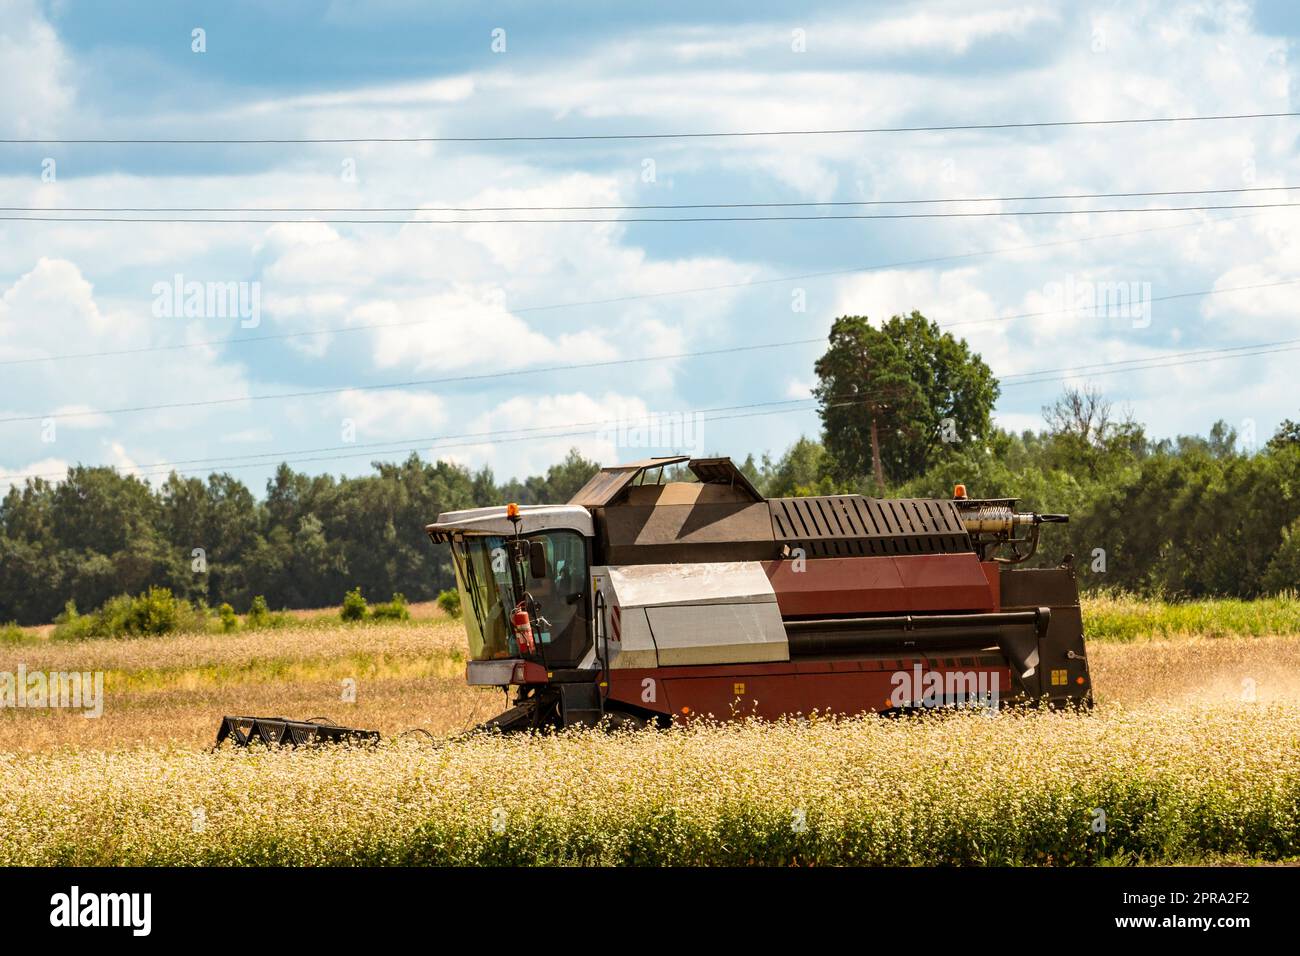 Working Harvesting Combine in the Field Stock Photo